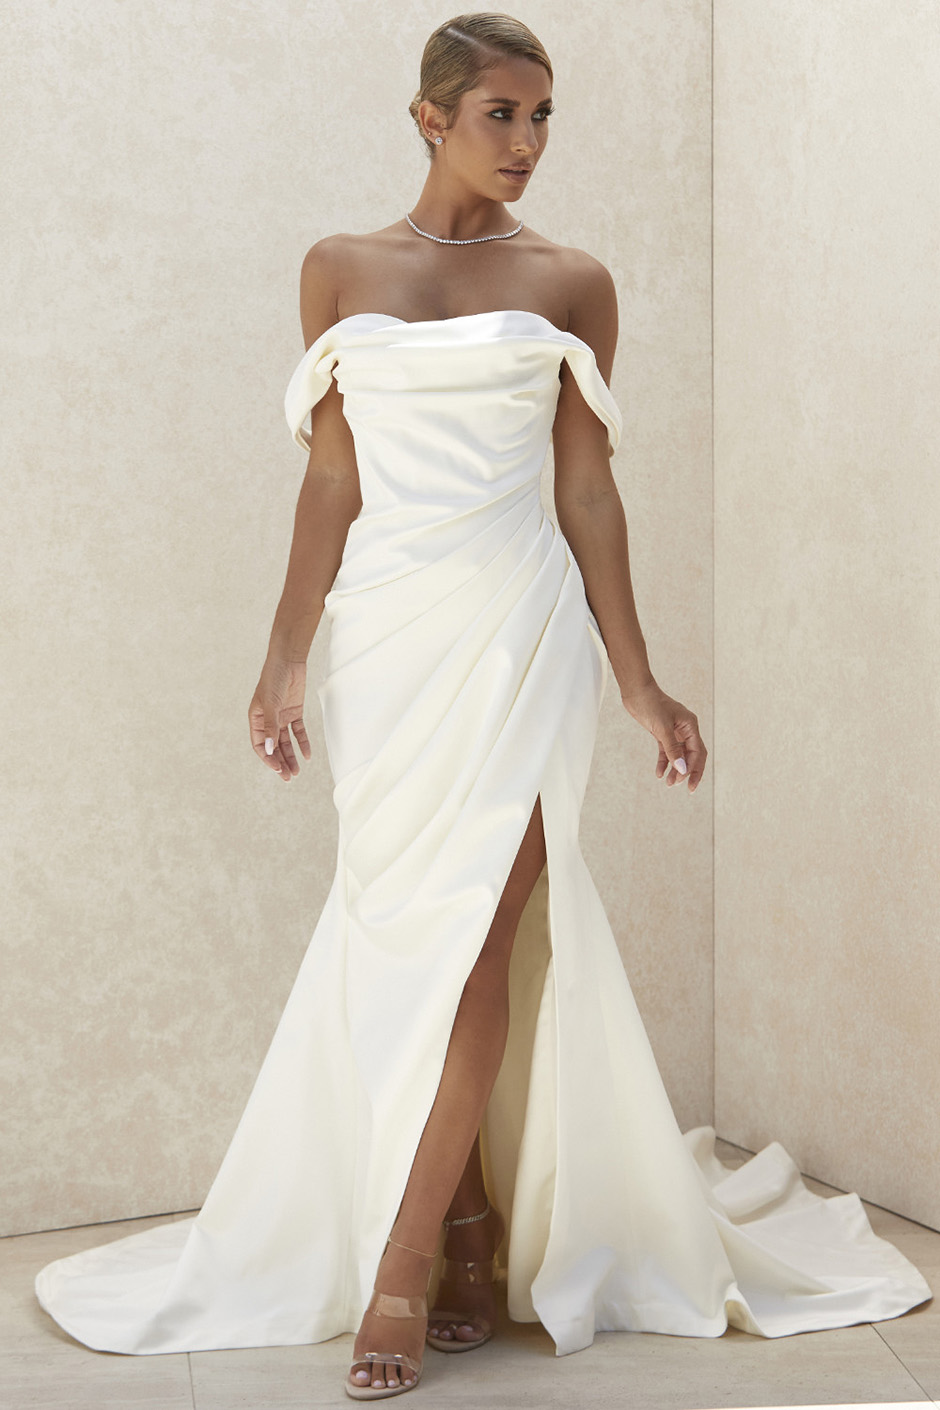 Satin draped bridal maxi dress from House of CB with thigh split